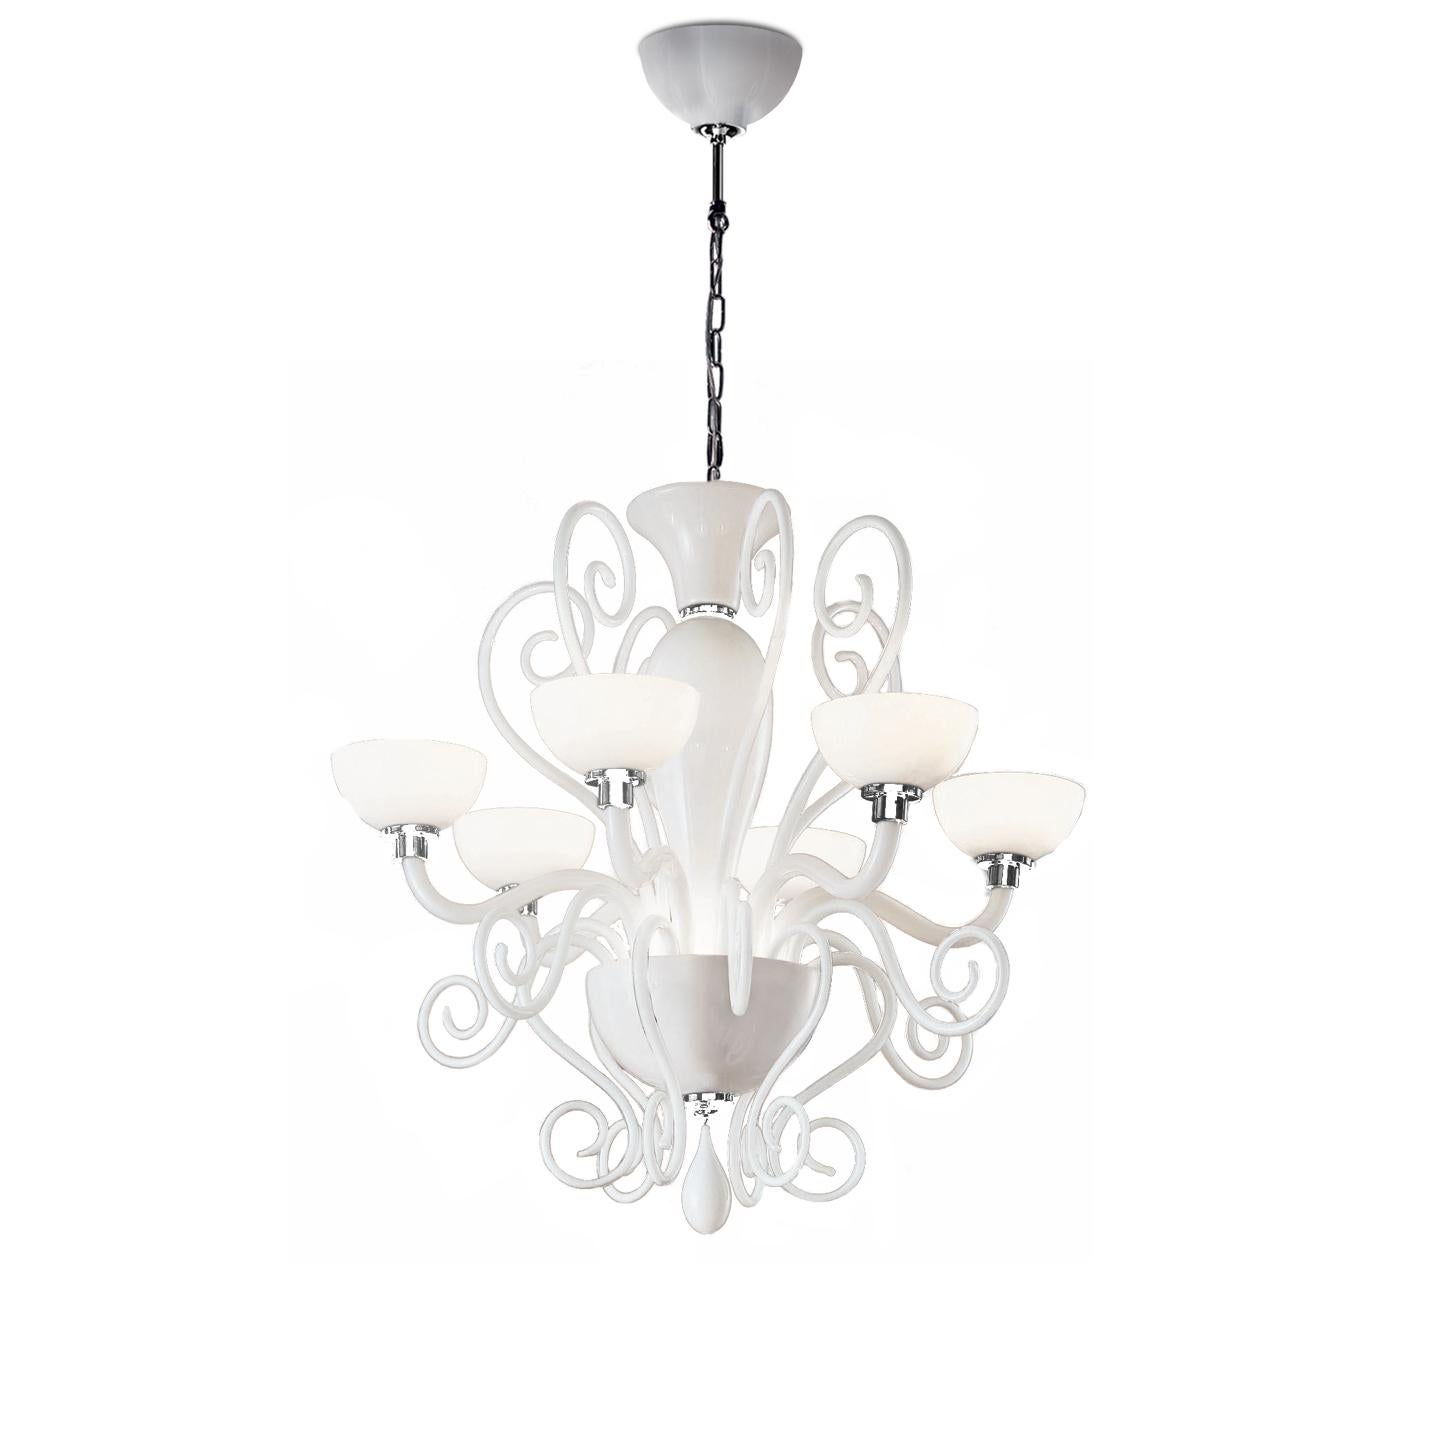 In 2005, Carlo Nason rethought the classic Murano chandelier form to create a light that was both traditional and contemporary. While the Bolero collection uses established Murano glass techniques, its form gives it a fresh playfulness and modern